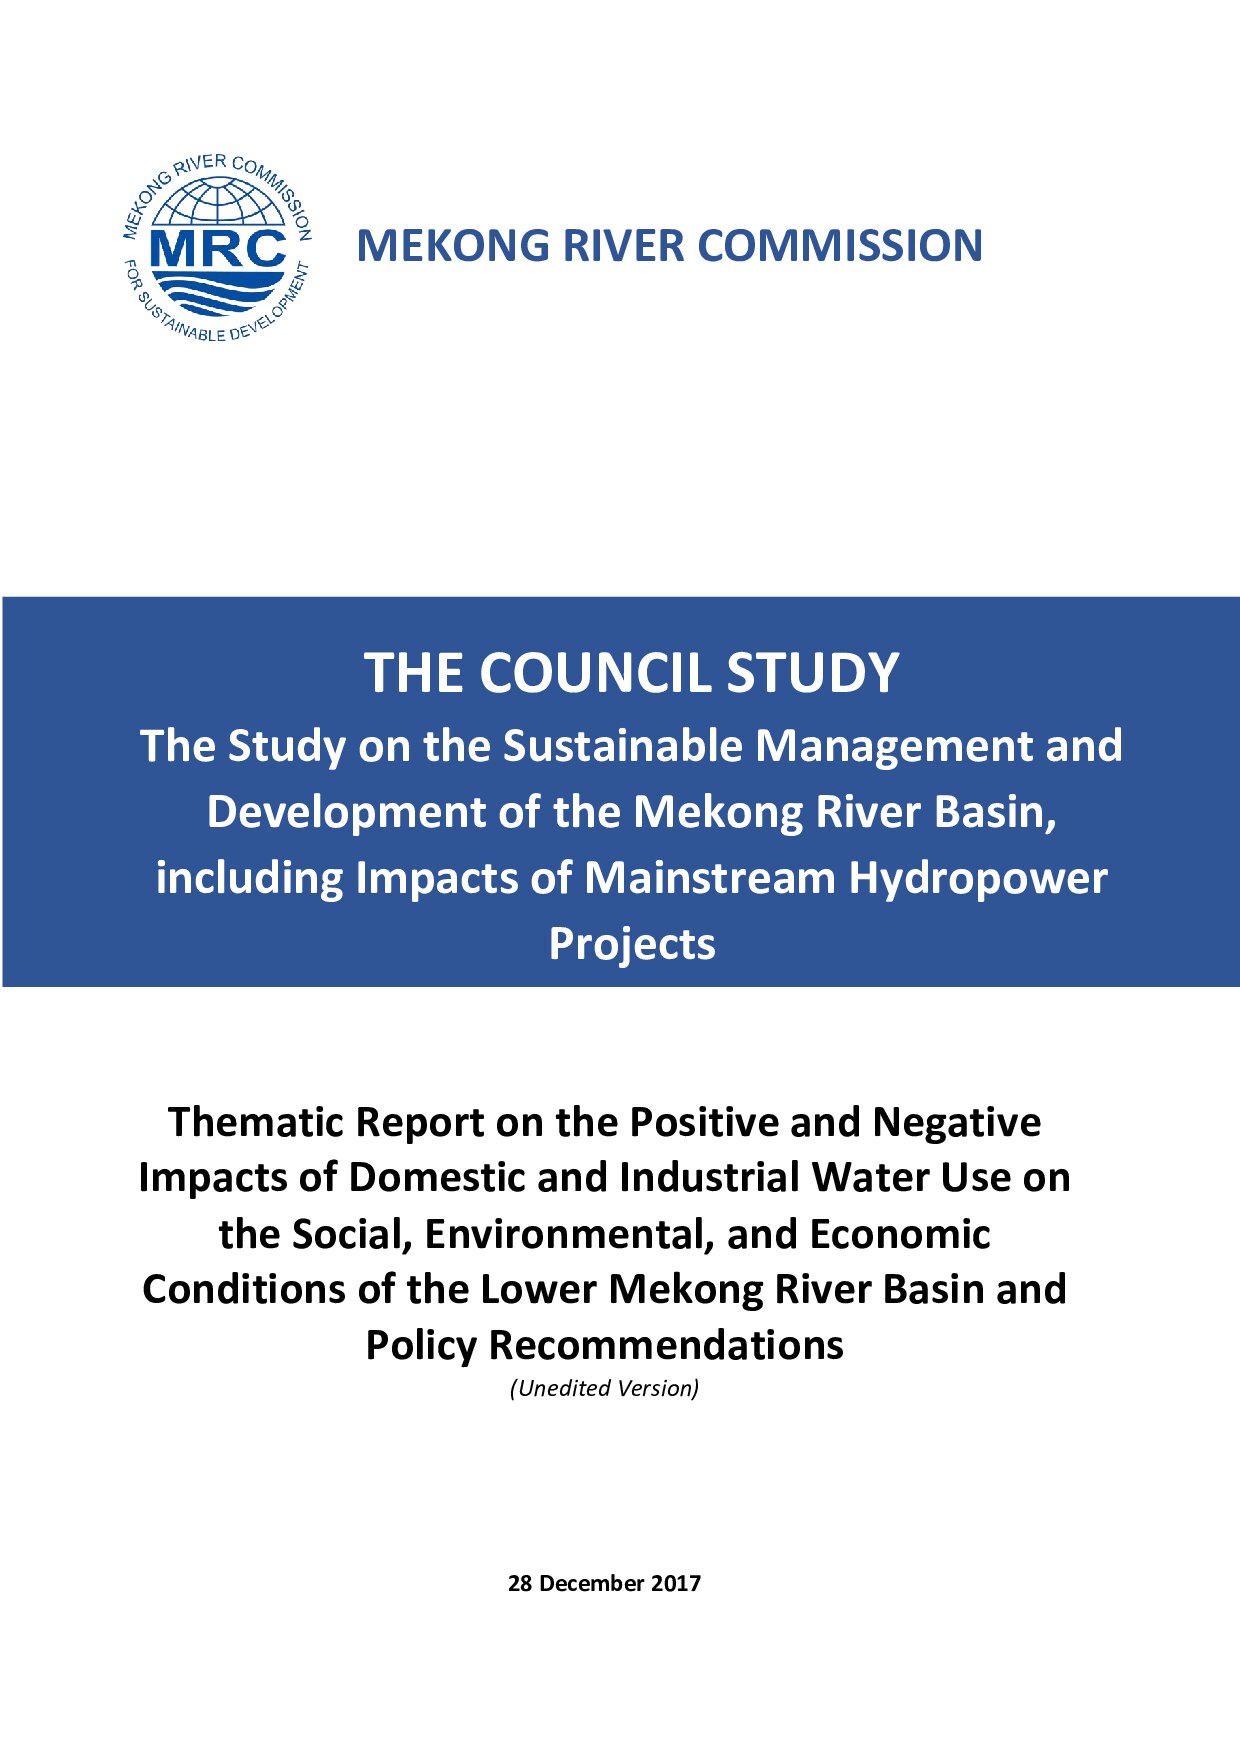 Thematic Report on the Positive and Negative Impacts of Domestic and Industrial Water Use on the Social, Environmental, and Economic Conditions of the Lower Mekong River Basin and Policy Recommendations